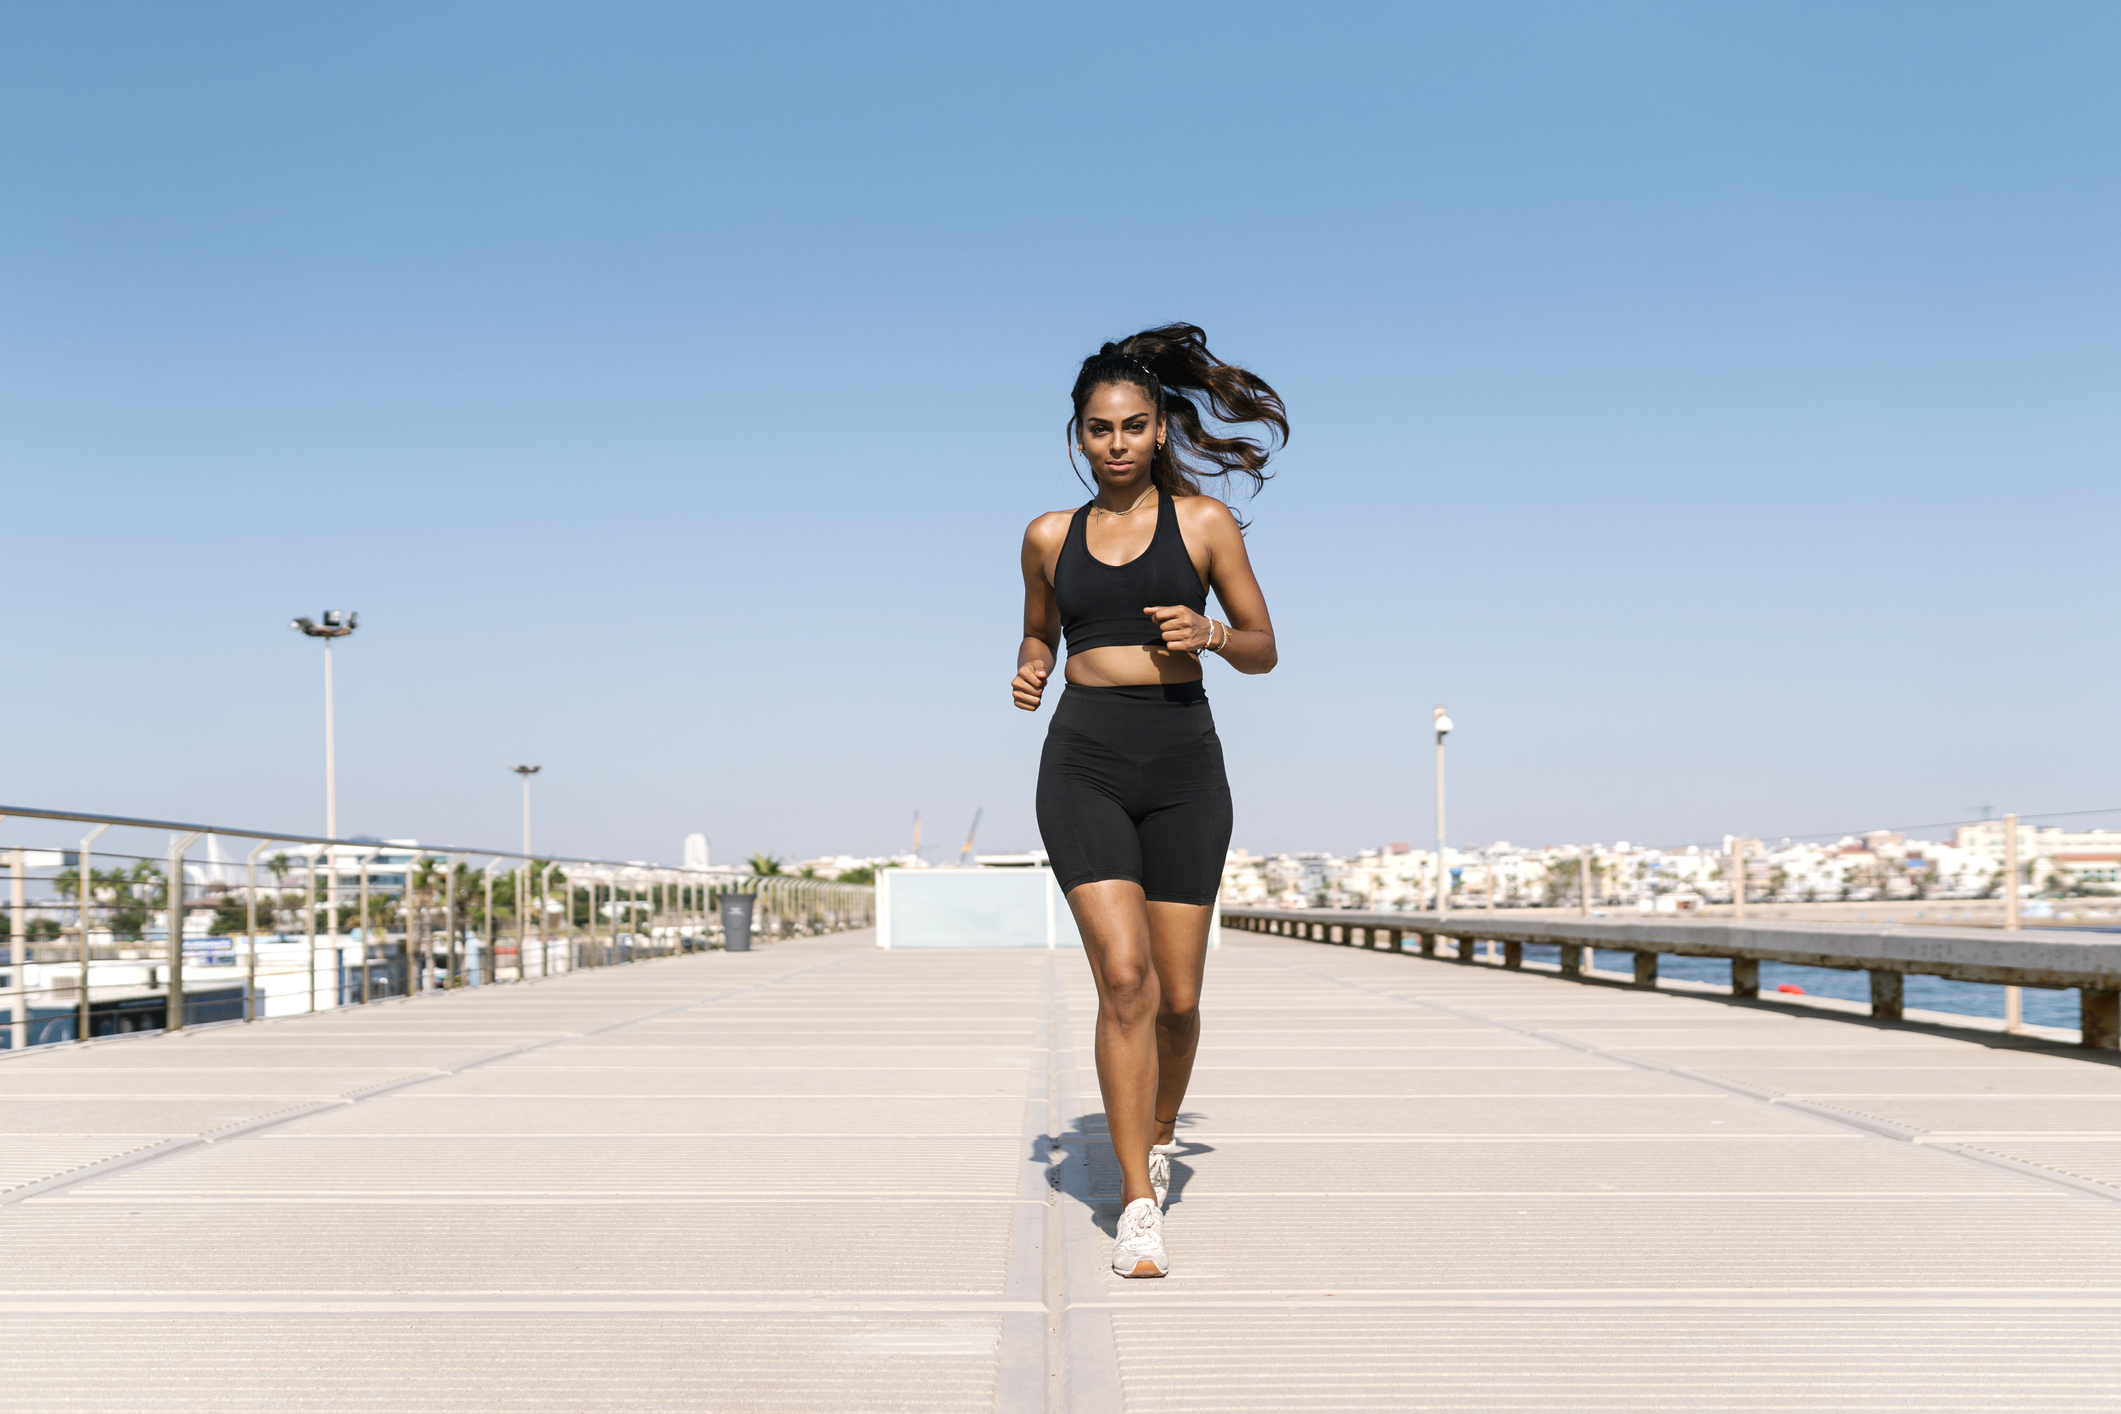 Strength Training Is the Secret To Becoming a Better Runner